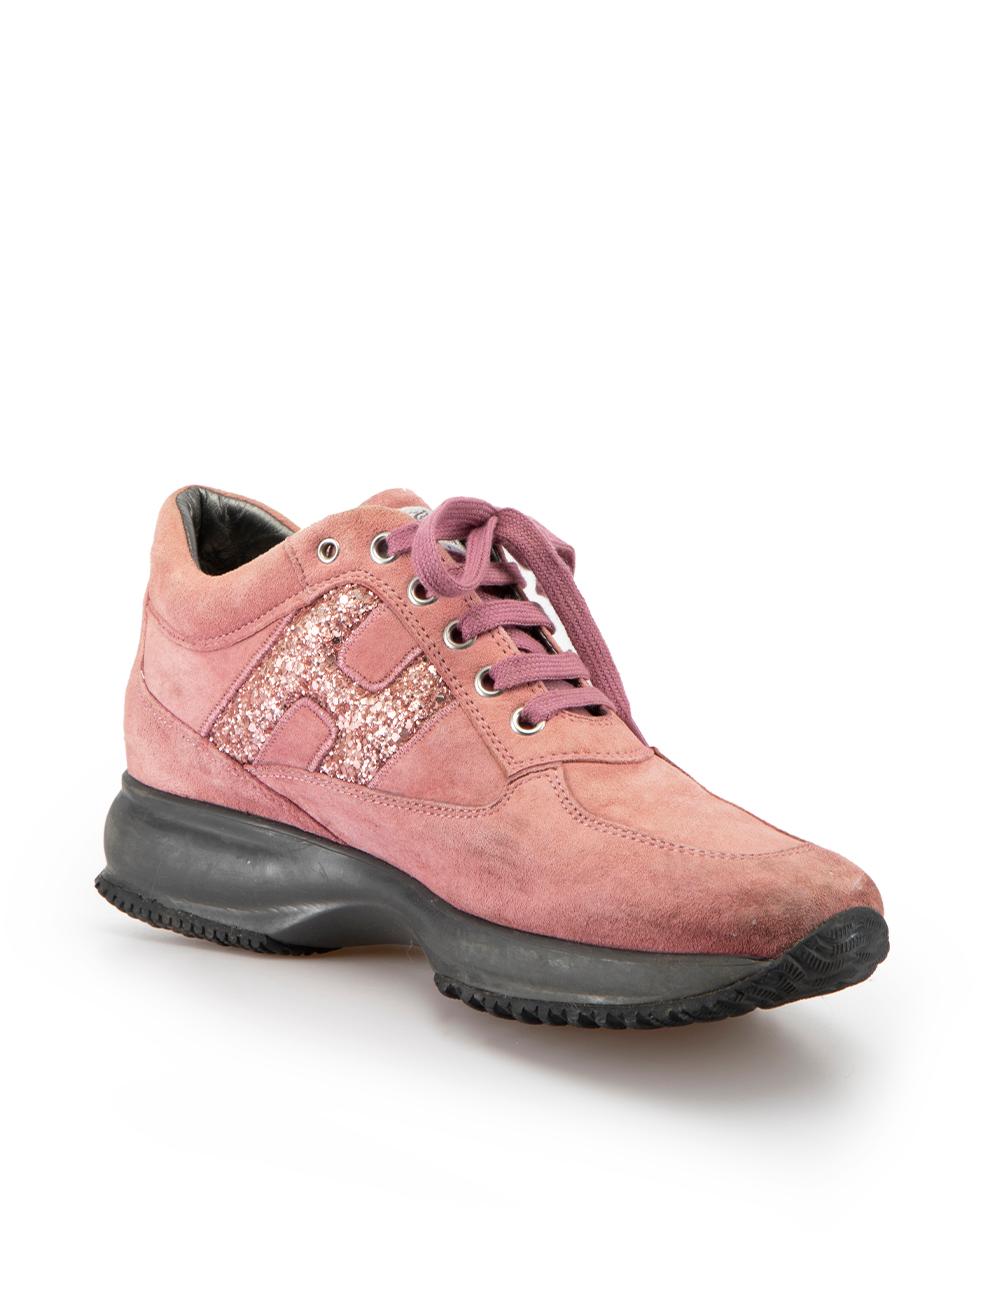 CONDITION is Very good. Minimal wear to trainers is evident. Minimal wear to both sides and heels of both trainers with discoloured scuff marks on this used Hogan designer resale item.



Details


Pink

Suede

Chunky trainers

Lace up